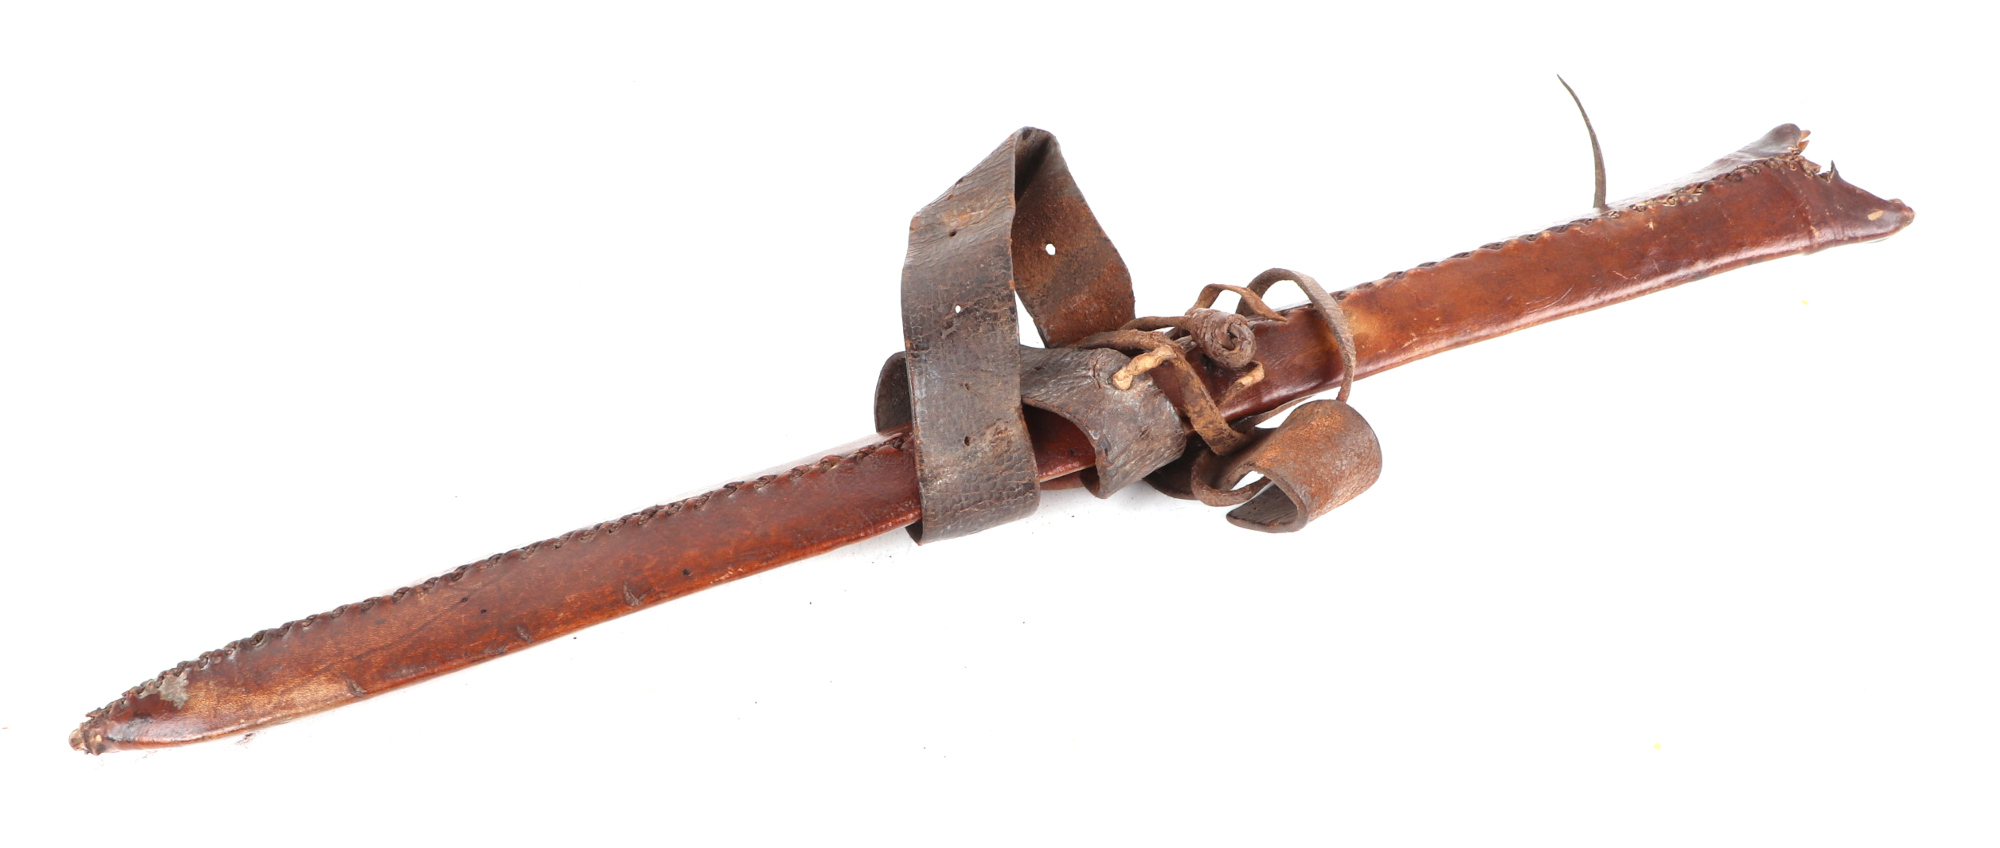 A Maasai Warrior Seme tribal sword, possible from the early 1900s, with leather scabbard, 64 long. - Image 4 of 4